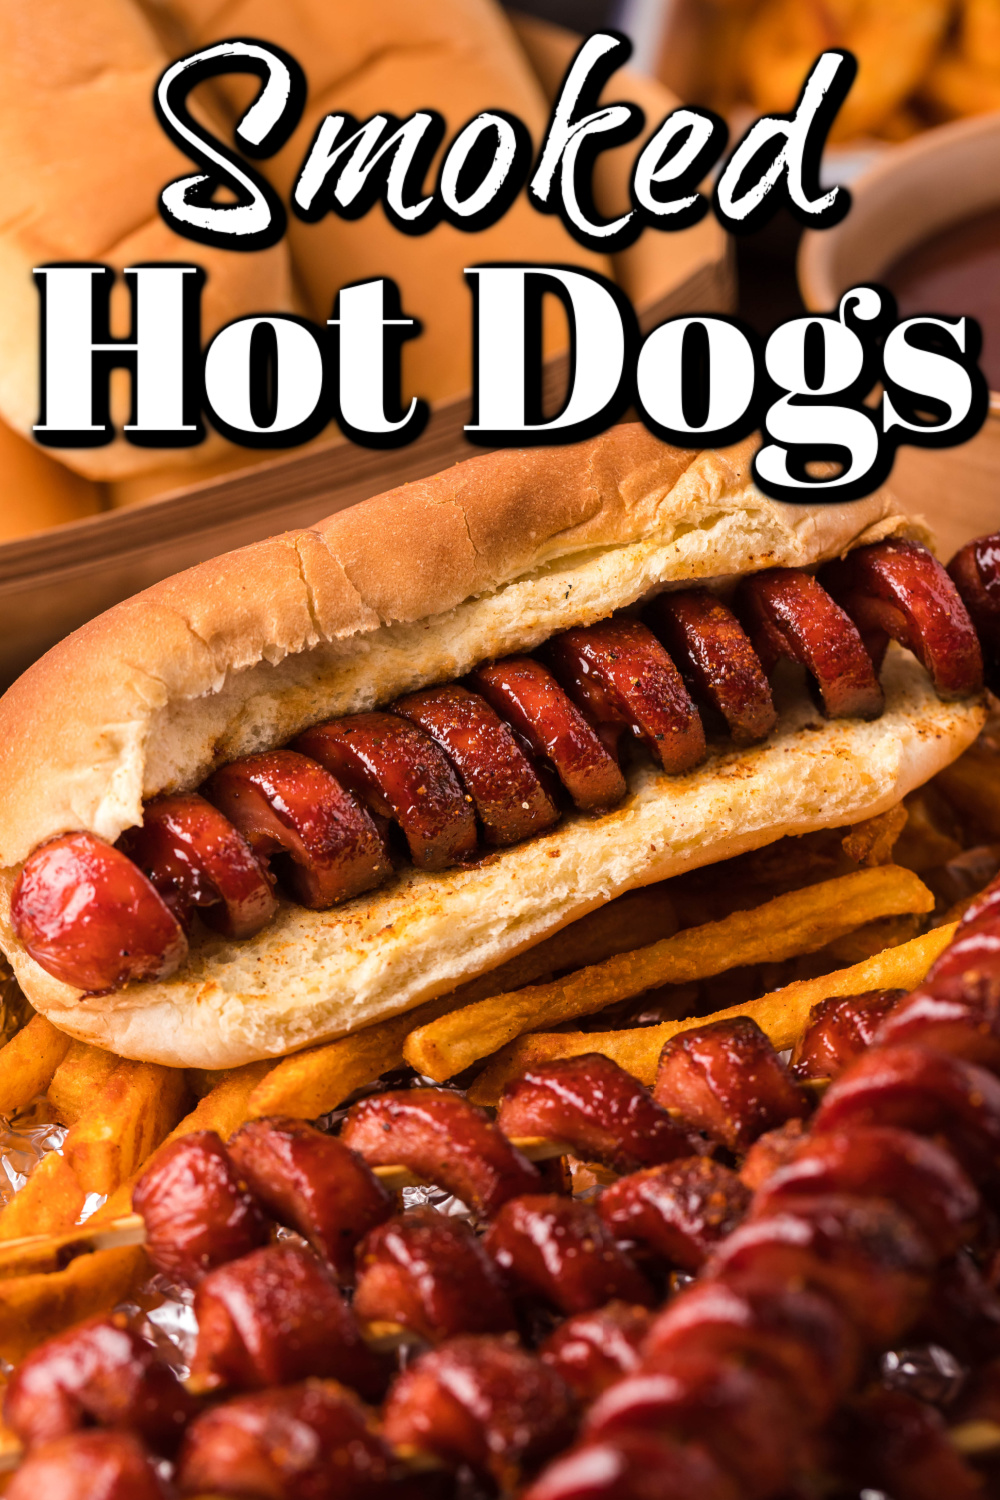 These smoked hot dogs are fantastic! Once you have made hot dogs this way you are never going to want to go back to grilling hot dogs again!